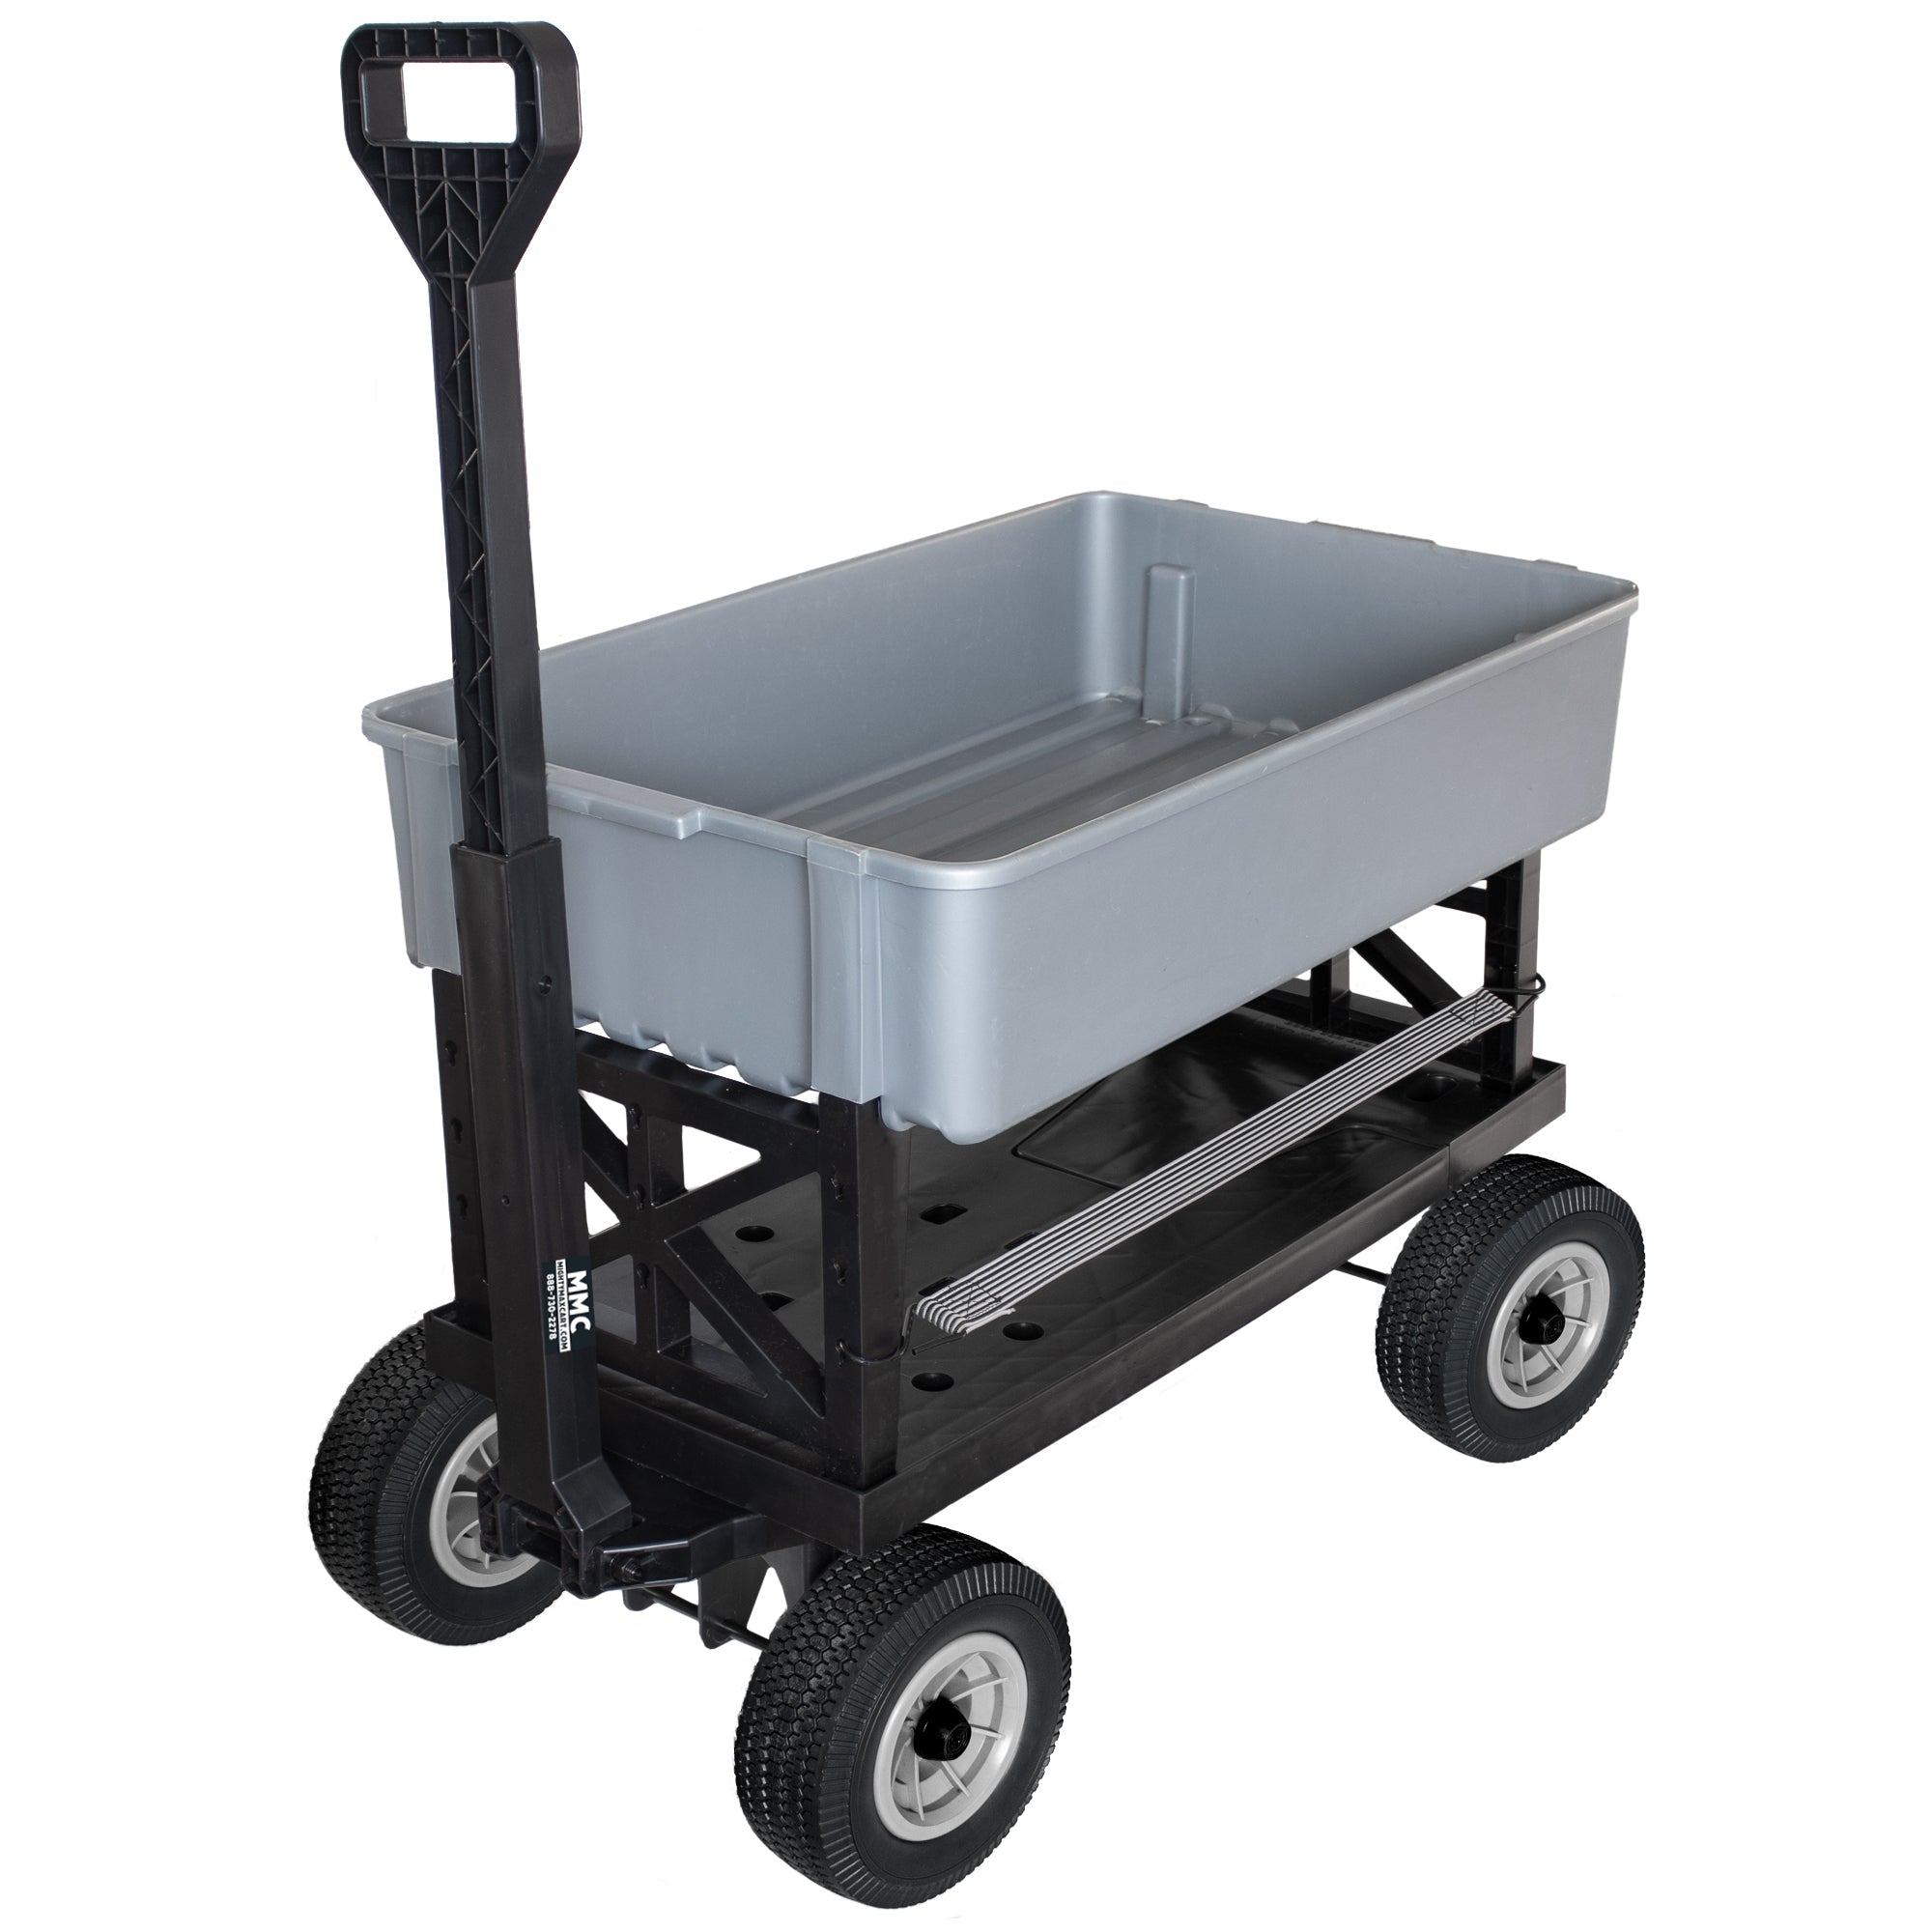 Mighty Max Cart, Mighty Max Cart Expandable Multi-Purpose Utility Cart New